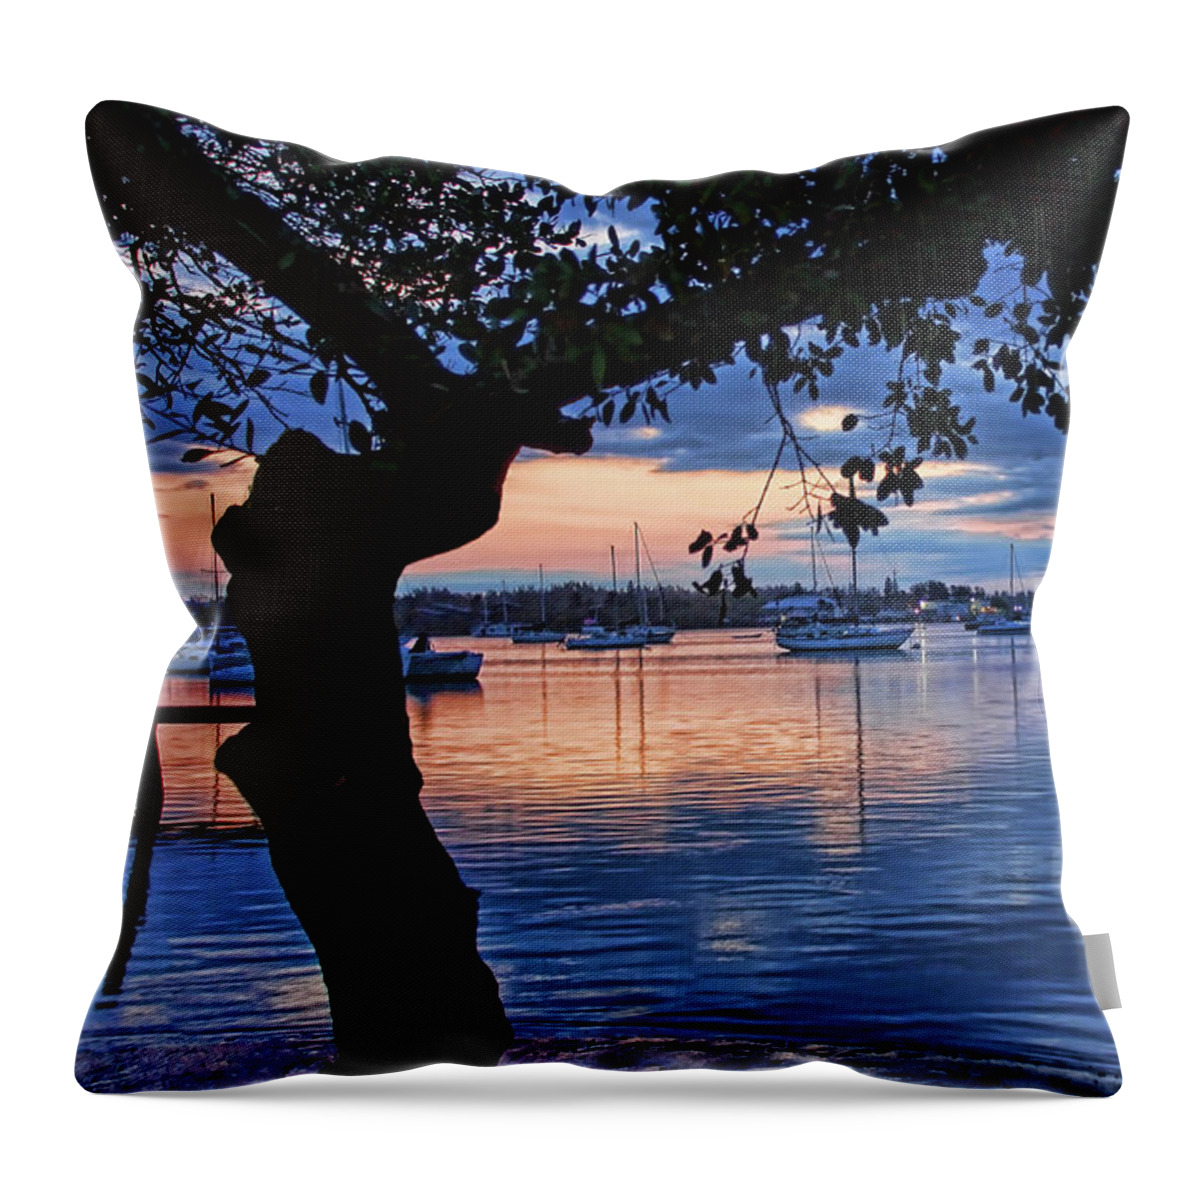 Florida Sunrise Throw Pillow featuring the photograph All Is Calm by HH Photography of Florida